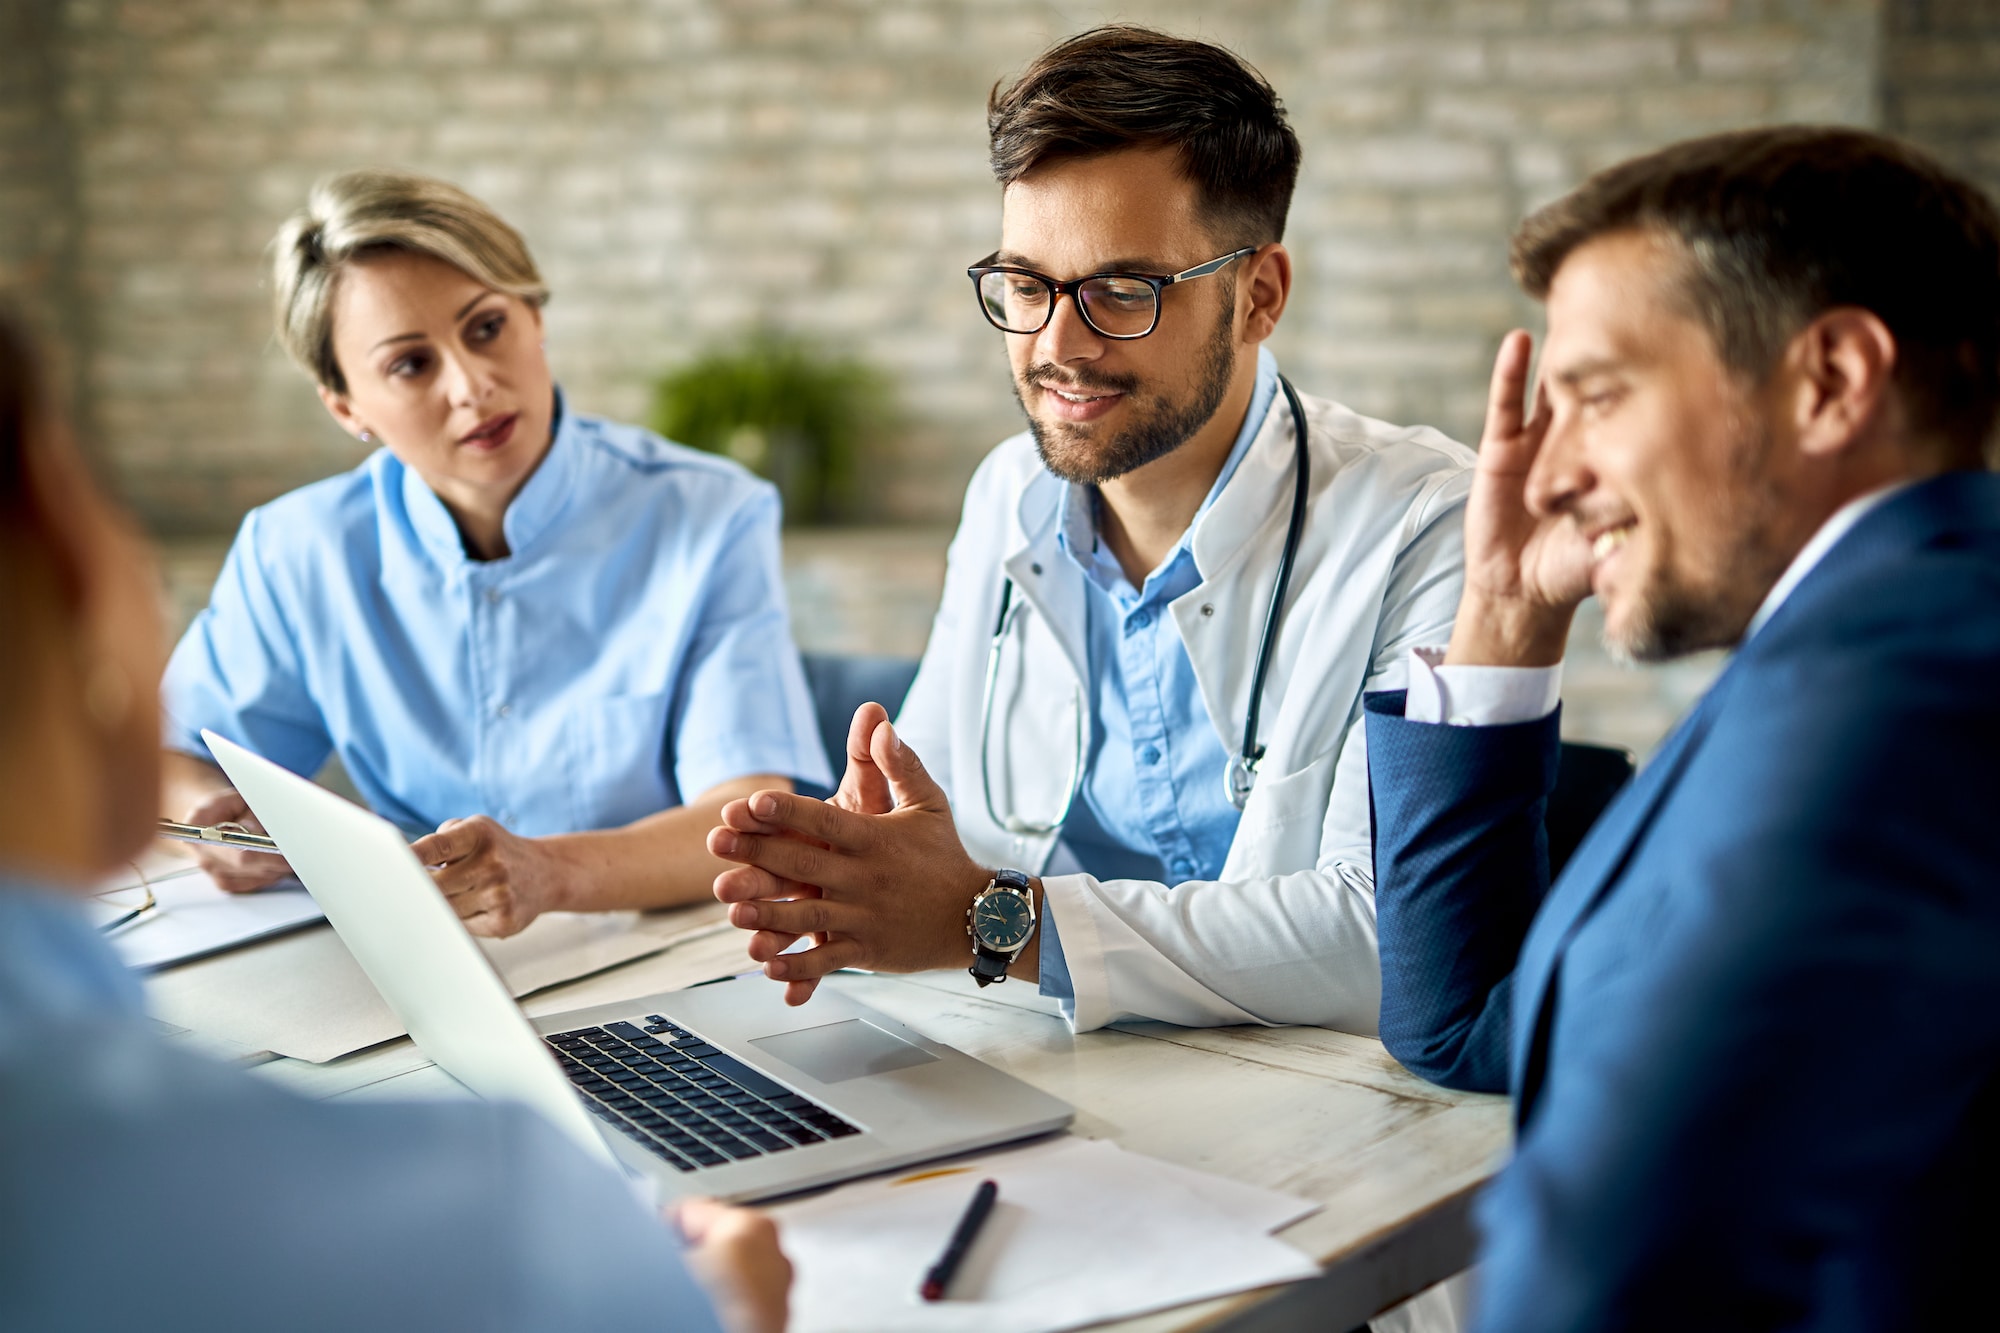 SEO for Doctors: How to Choose the Right Agency to Work With